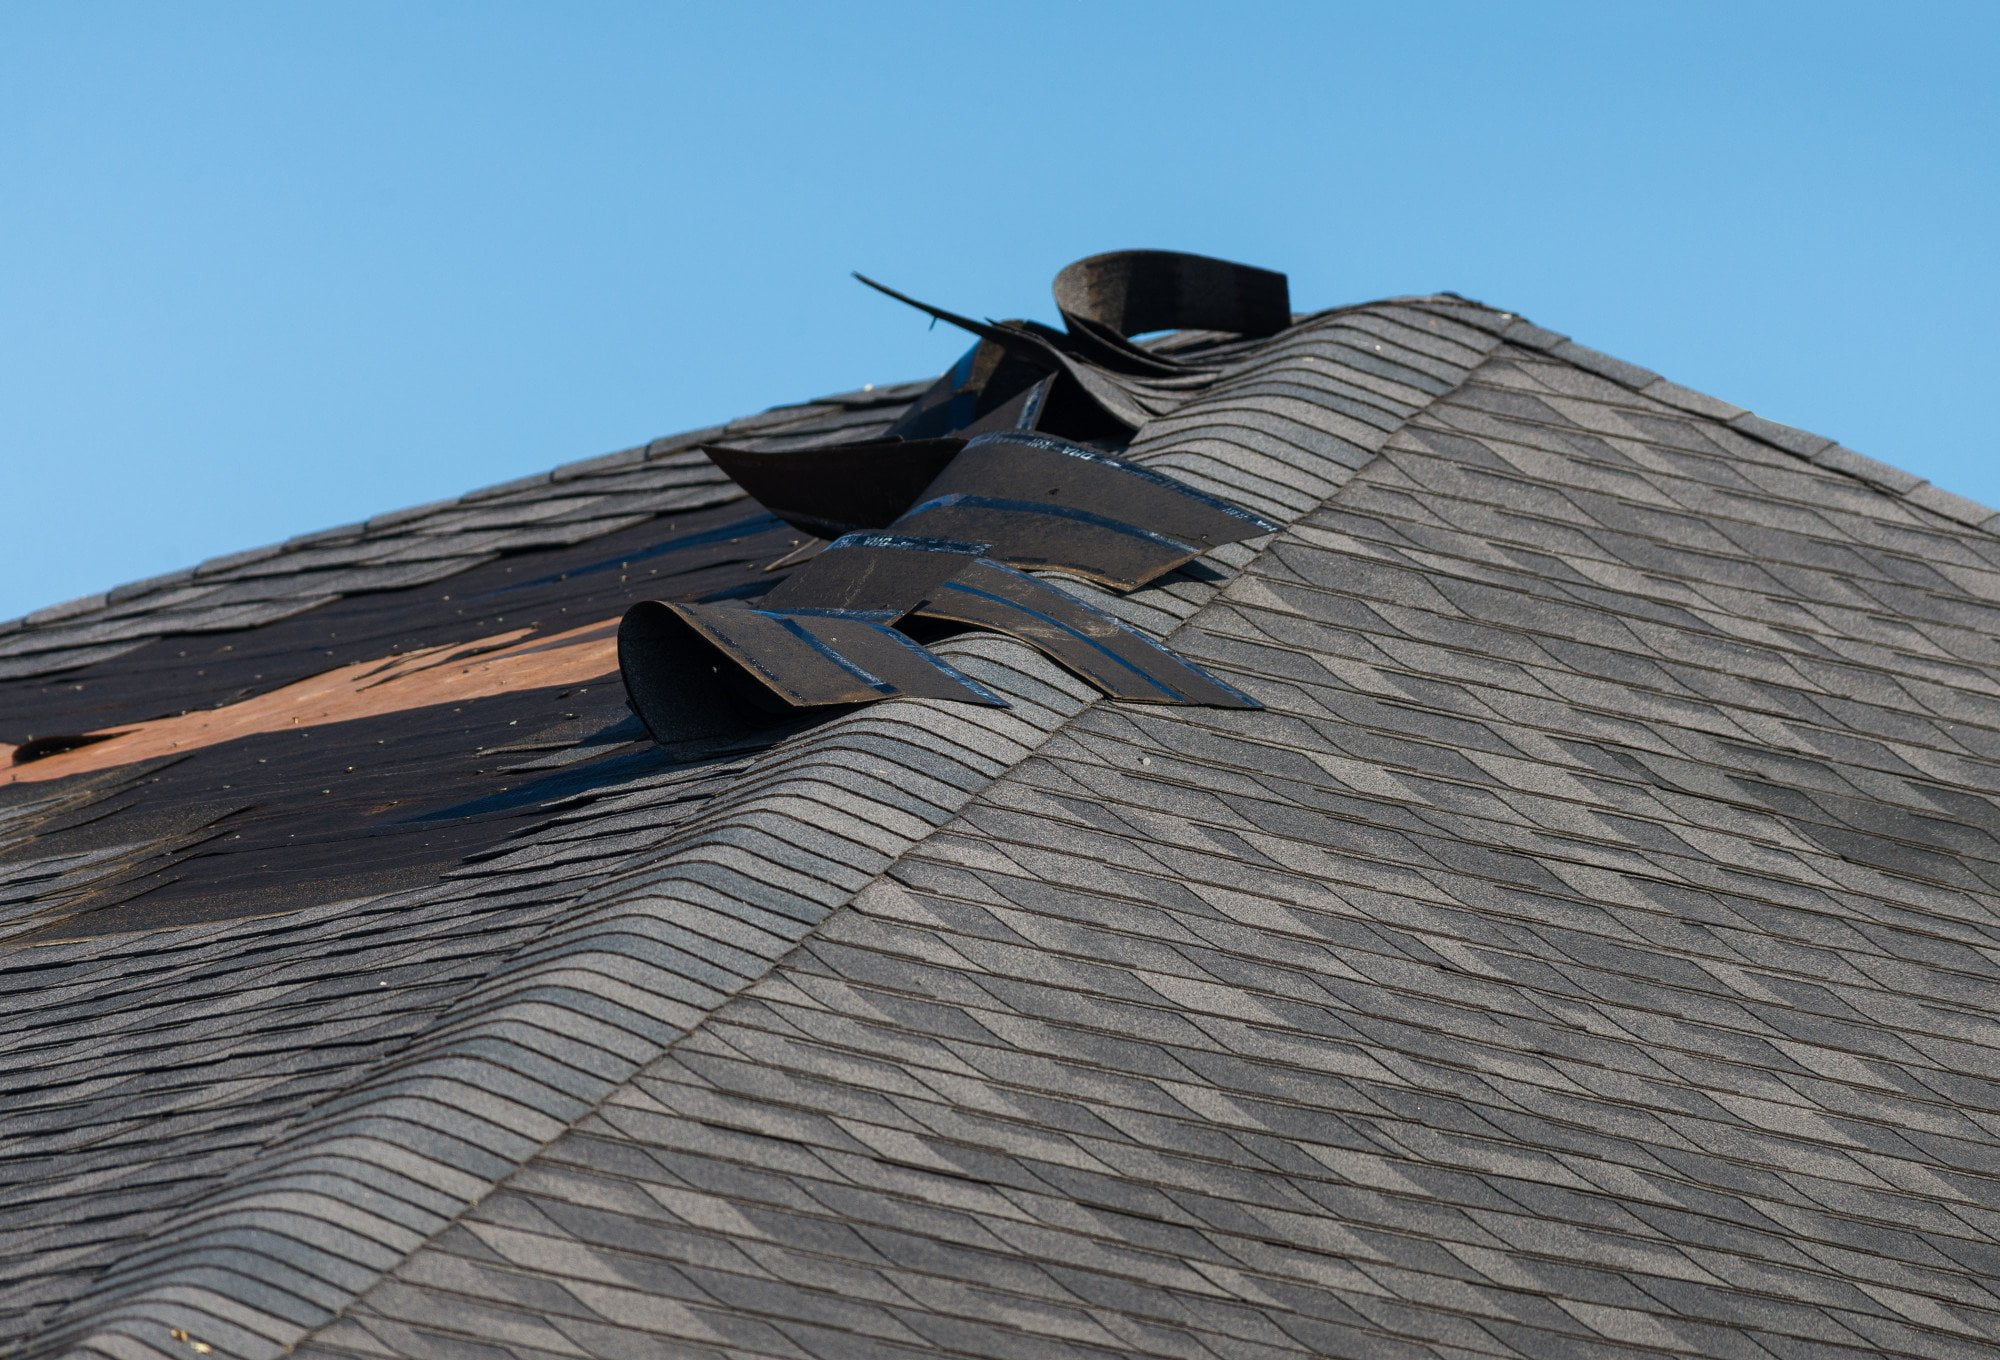 There are several reasons why you may need a new roof. Here are some tips on how to negotiate roof replacement with insurance.